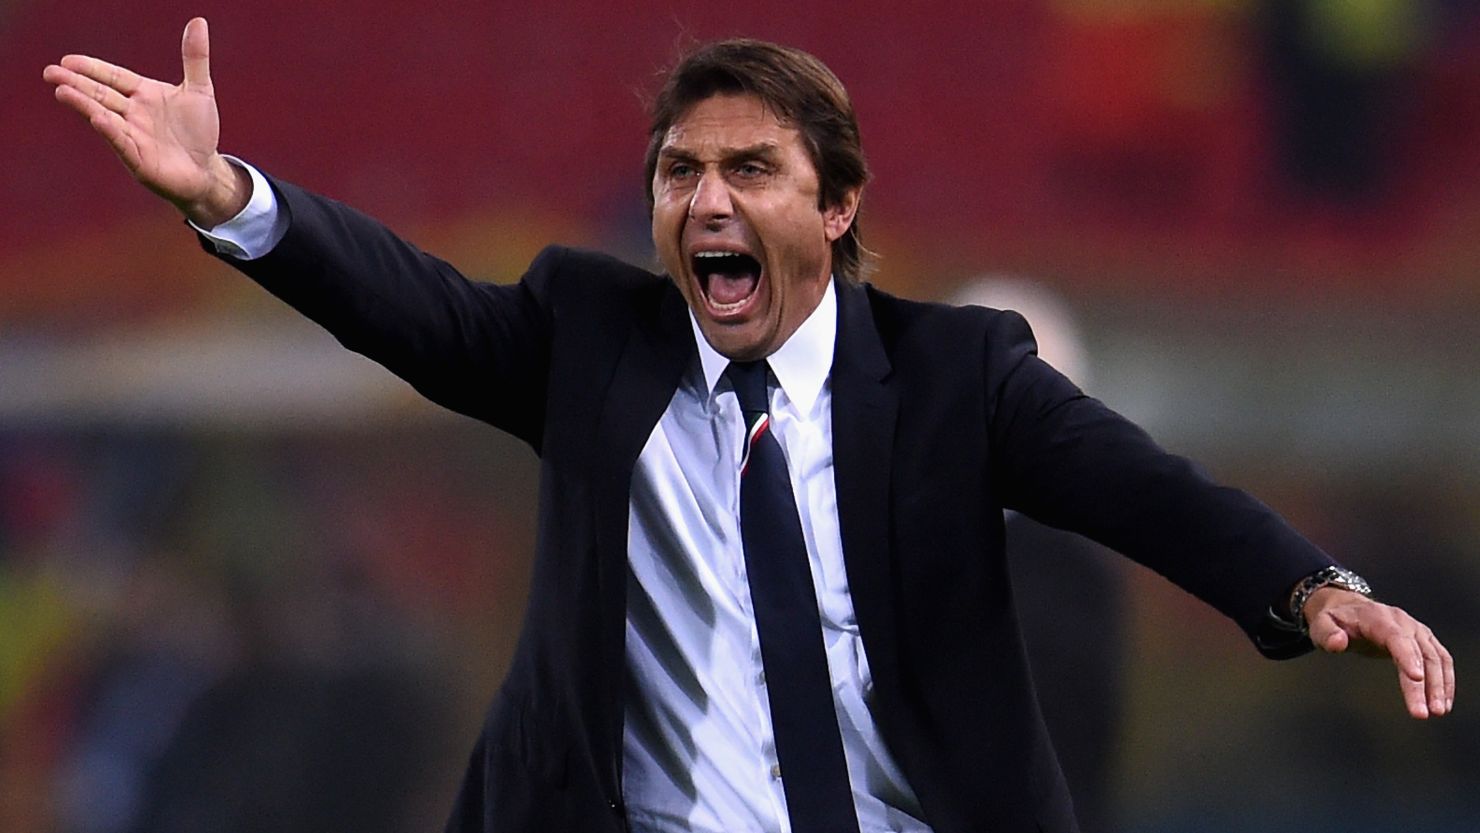 Antonio Conte is preparing to take Italy to Euro 2016 in France.